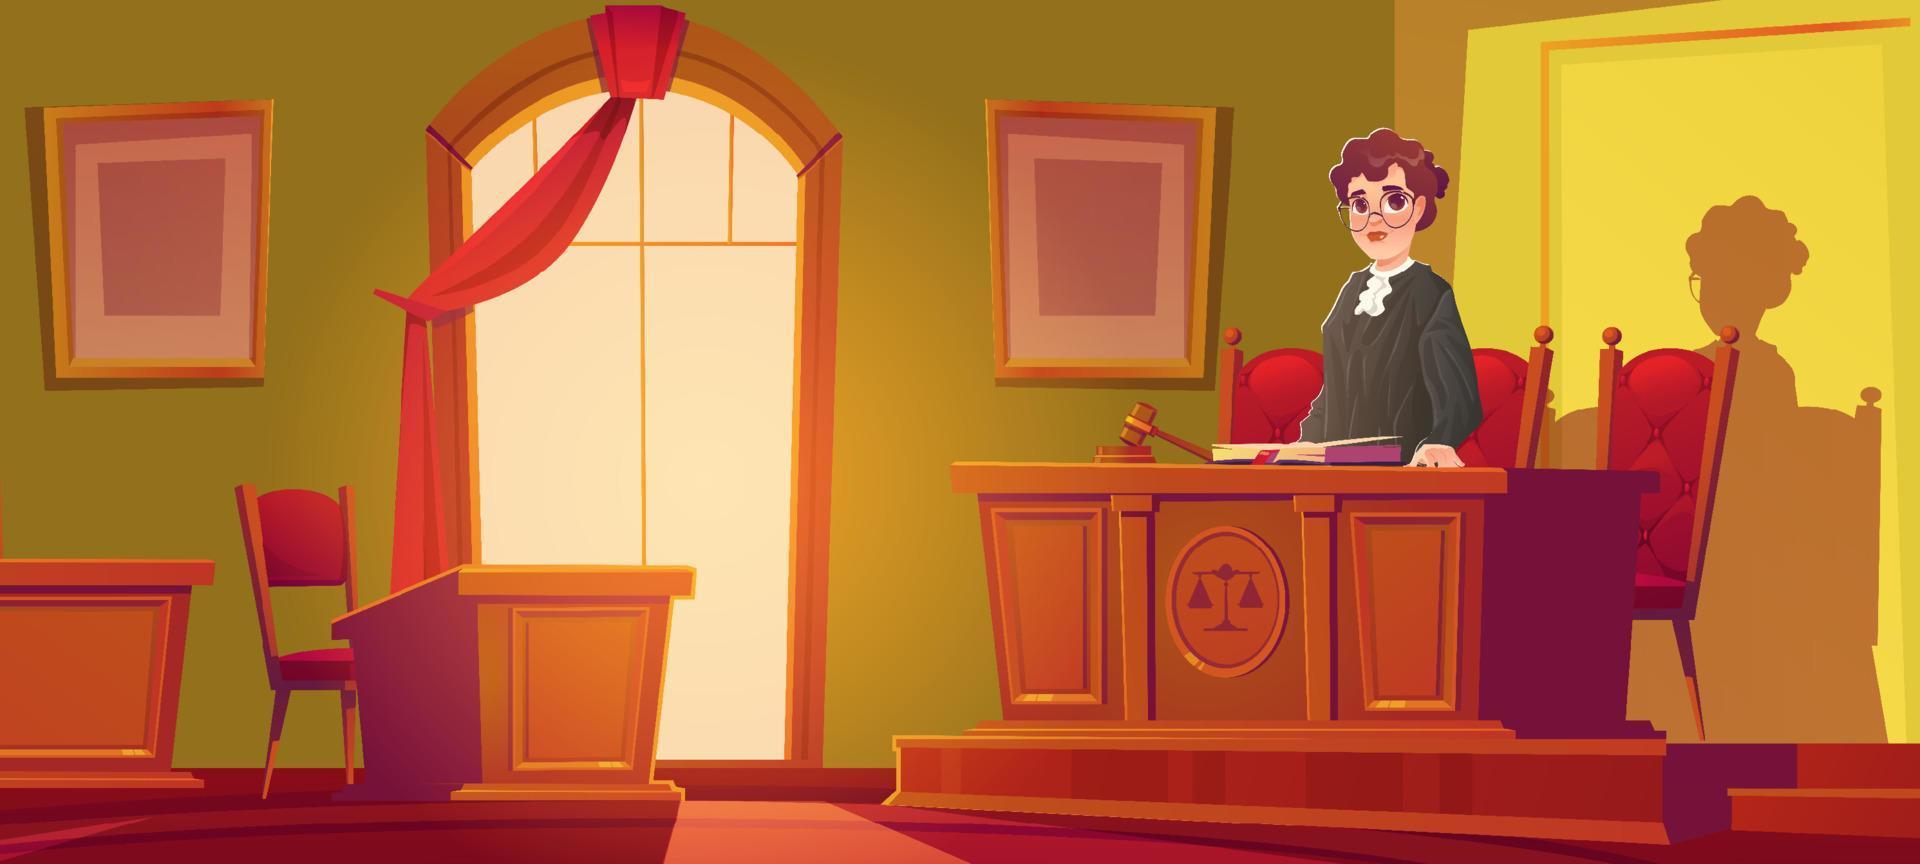 Woman judge in courtroom with hammer and documents vector